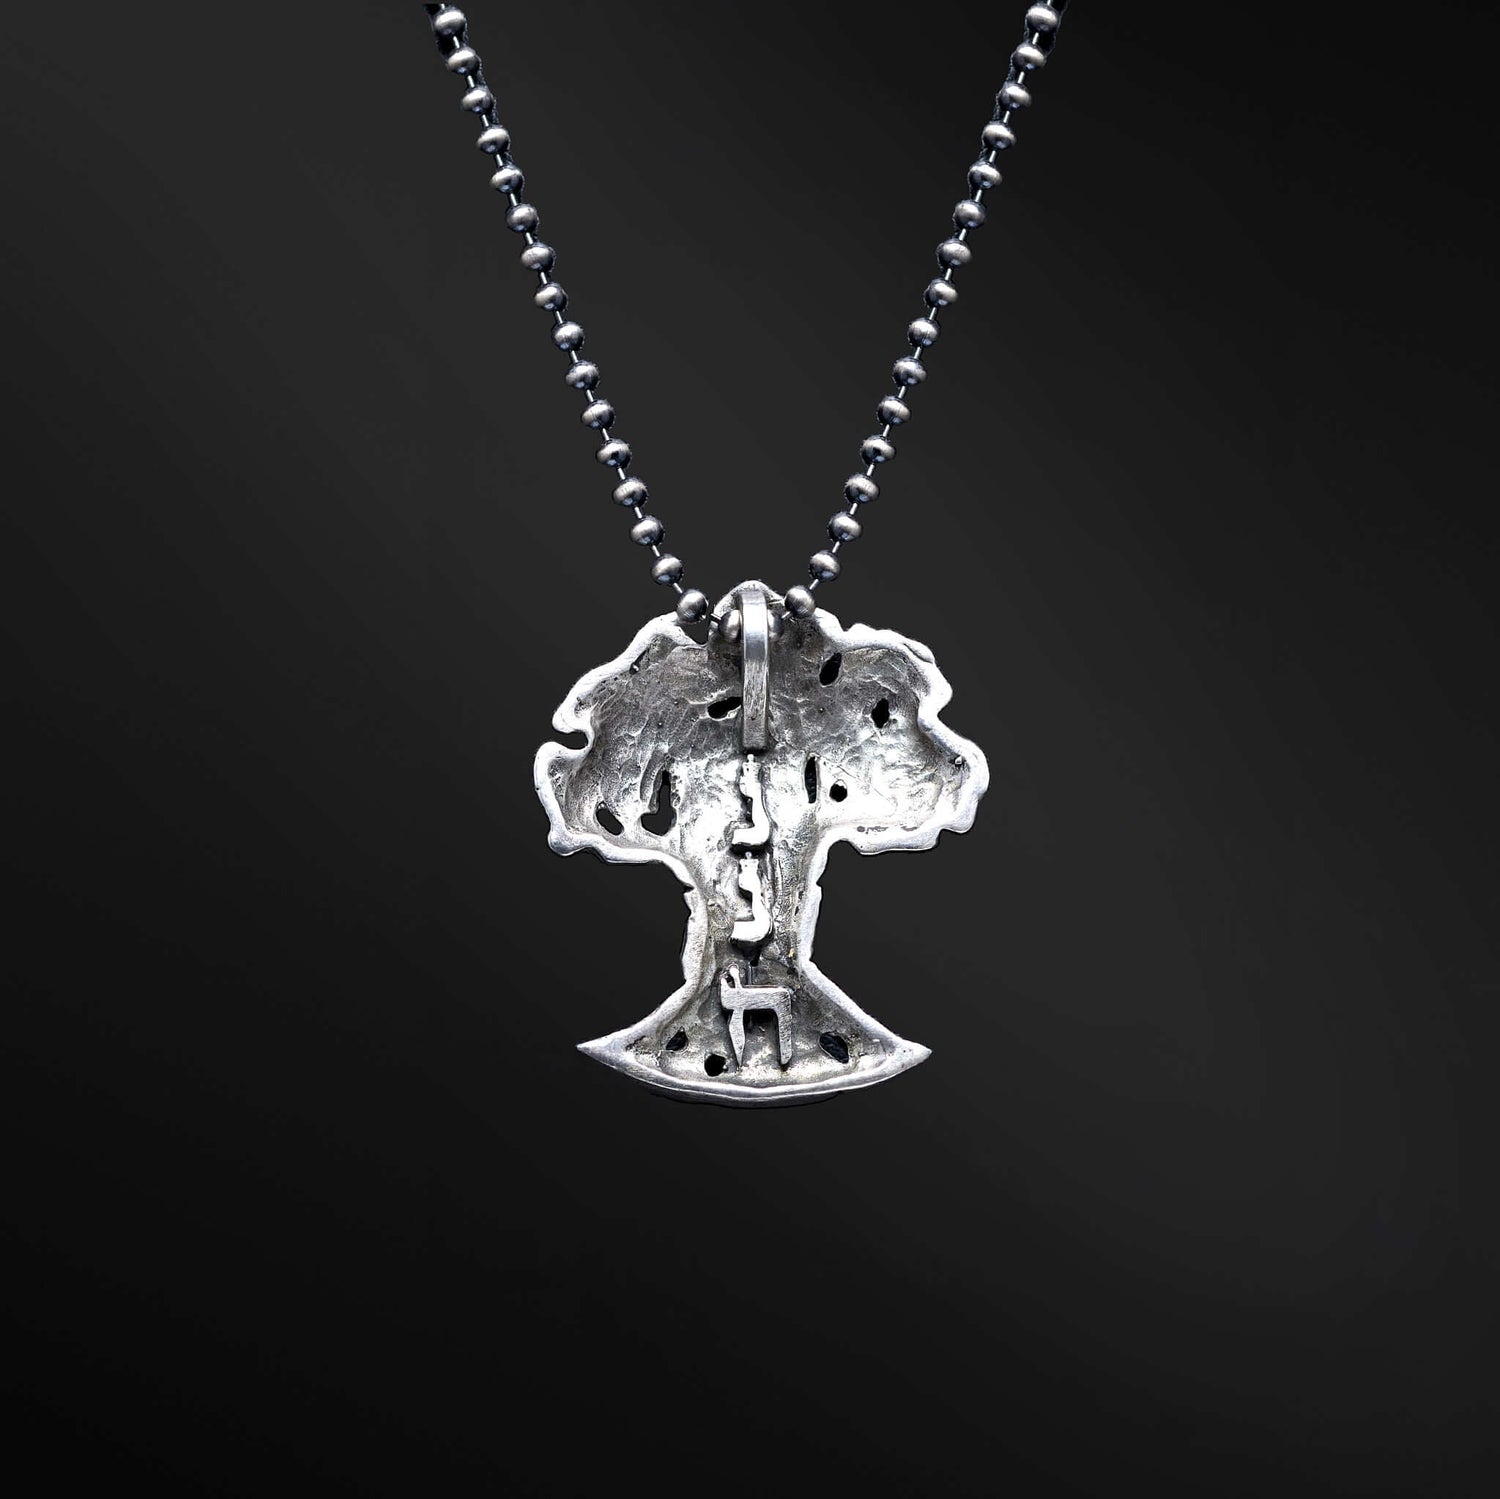 &quot;HaEts Cheli Necklace: A photograph showcasing the exquisite HaEts Cheli necklace. The pendant features a captivating tree design with the Hebrew phrase &